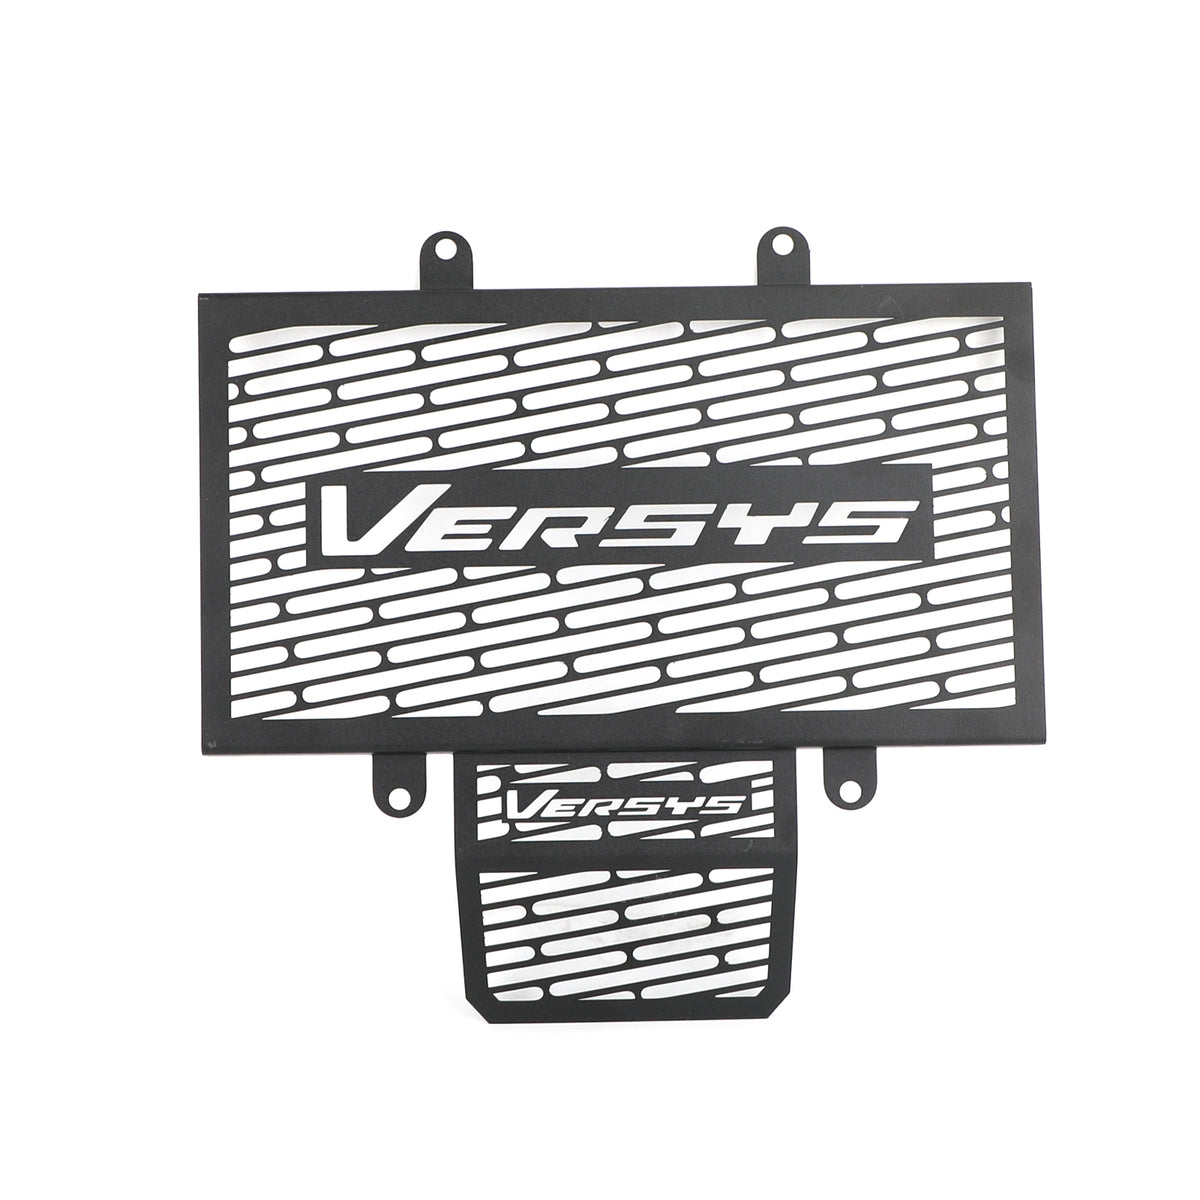 RADIATOR GUARD PROTECTOR COVER GRILLE Fit for Kawasaki VERSYS-X 300 KLE300 17-20